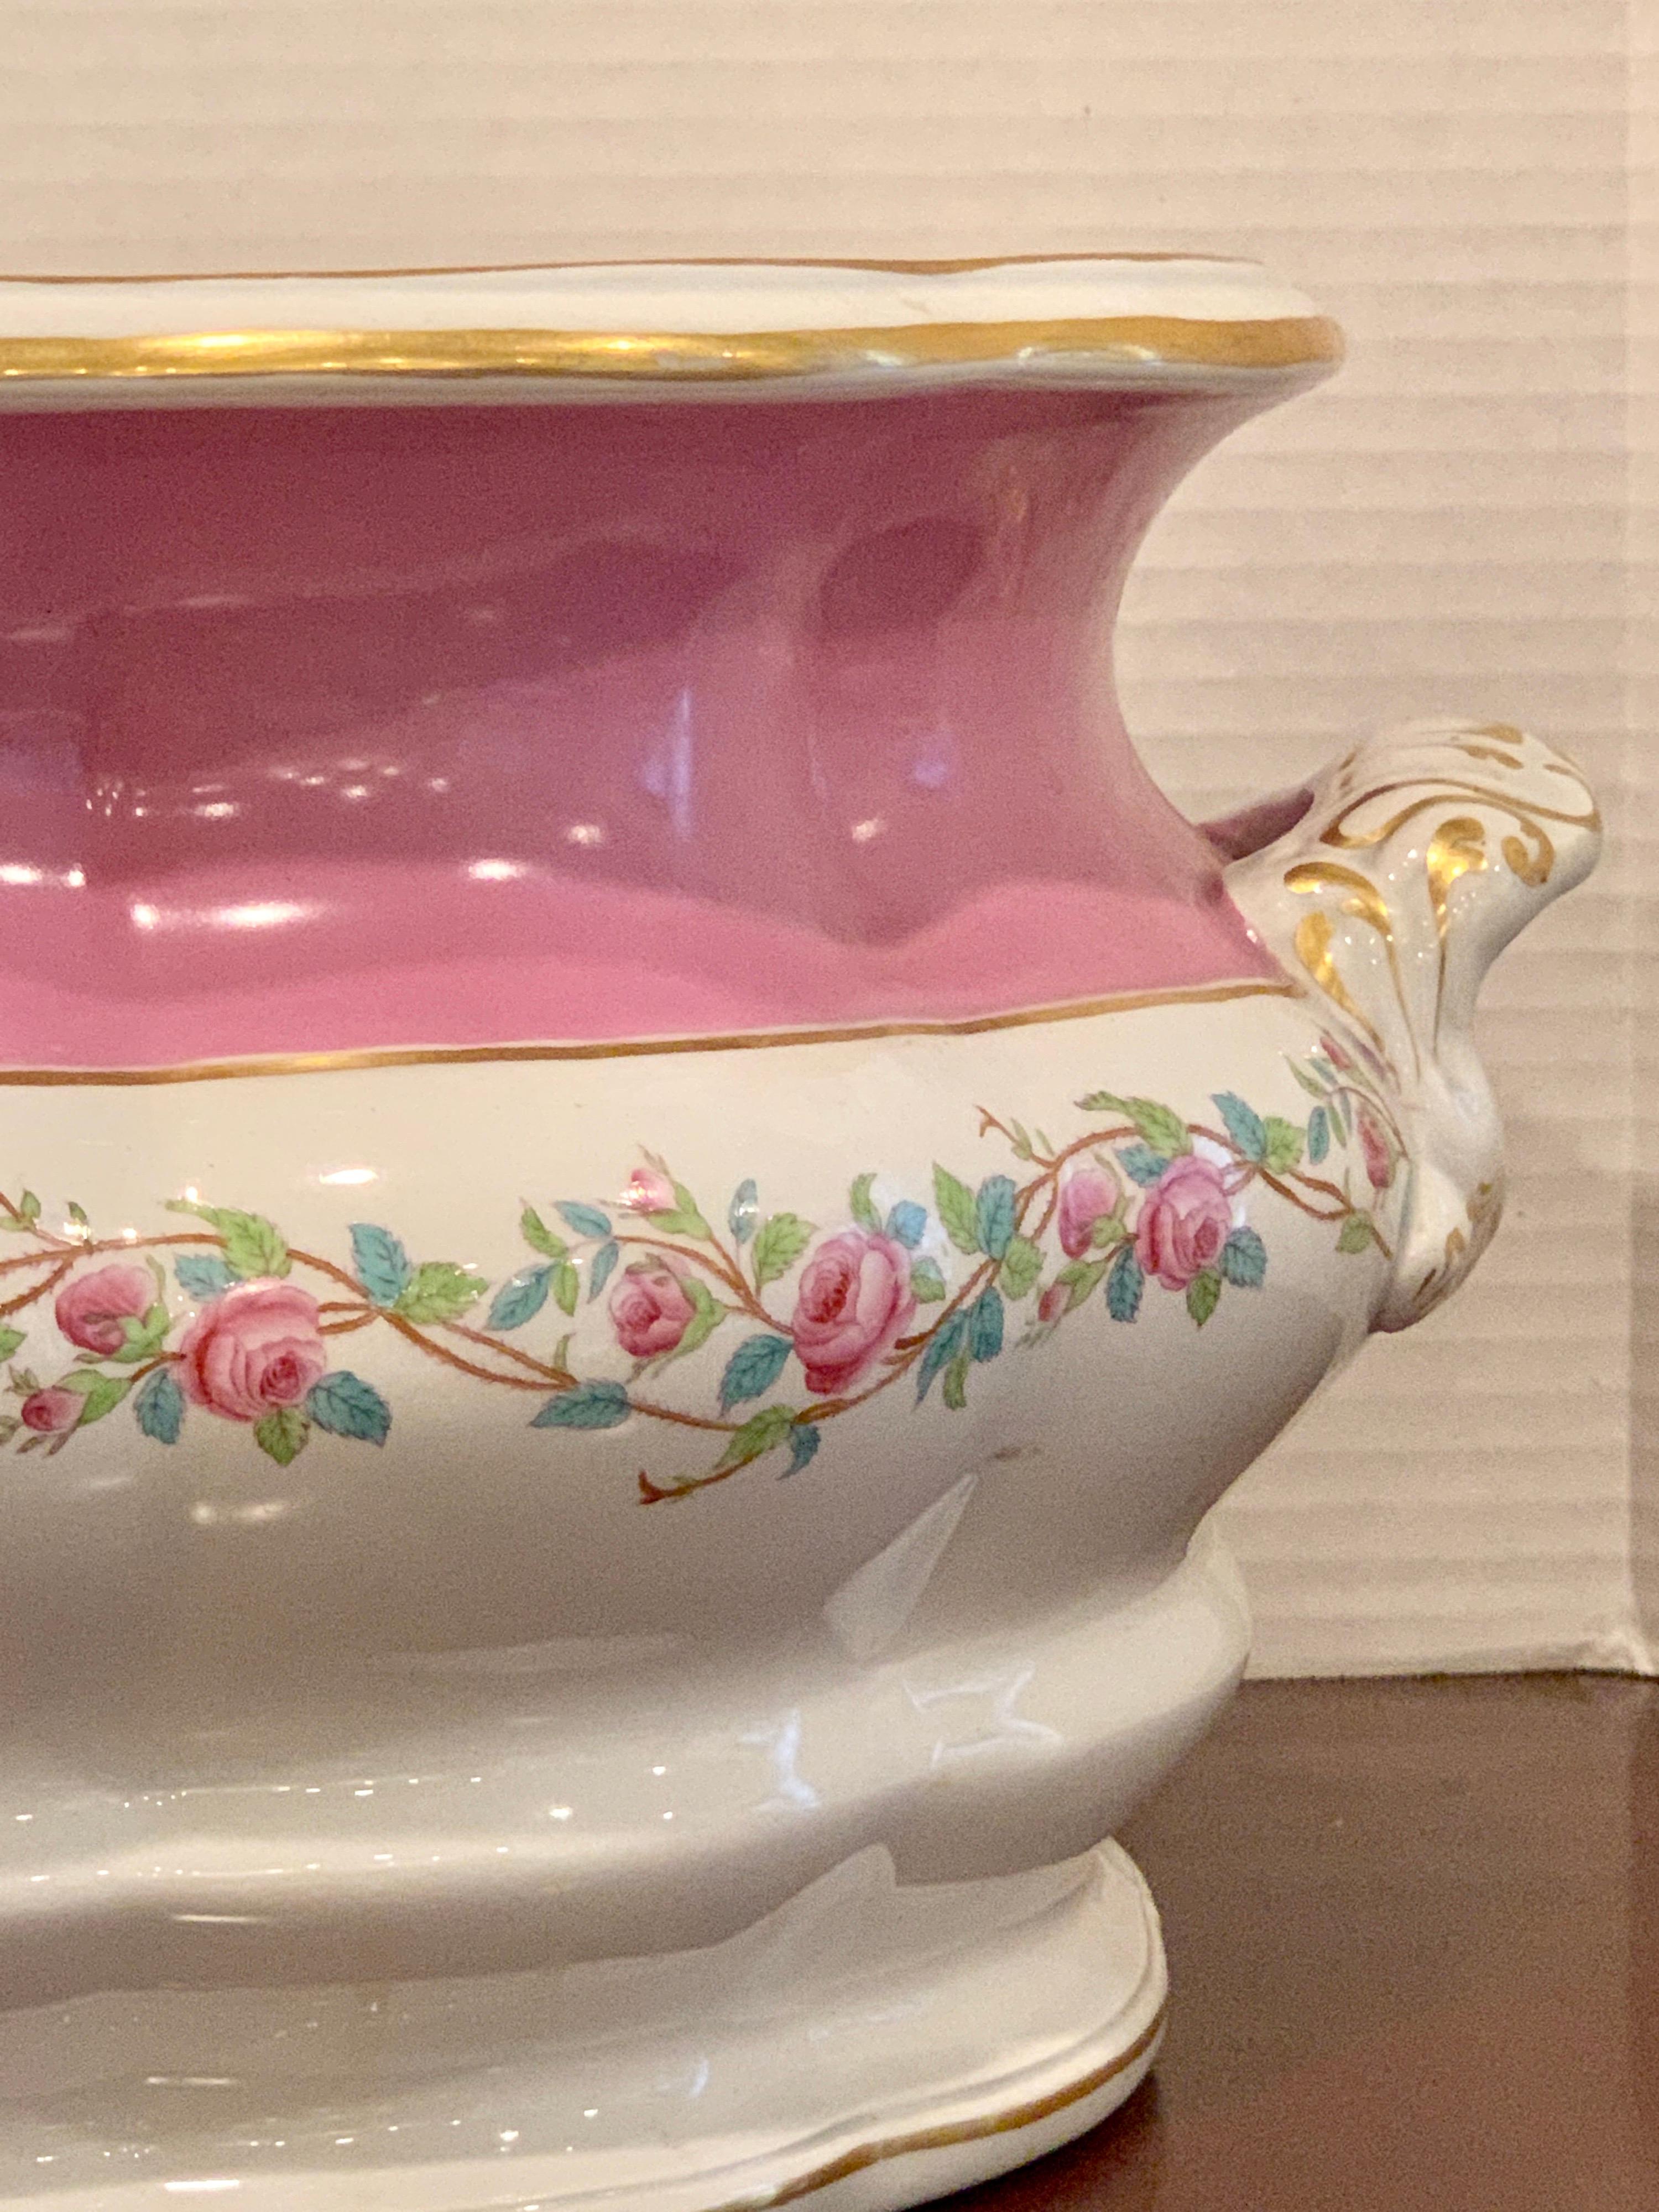 19th century pink floral porcelain foot bath, attributed to Mintons.
With oval pink palette handled body, base measues 14.5